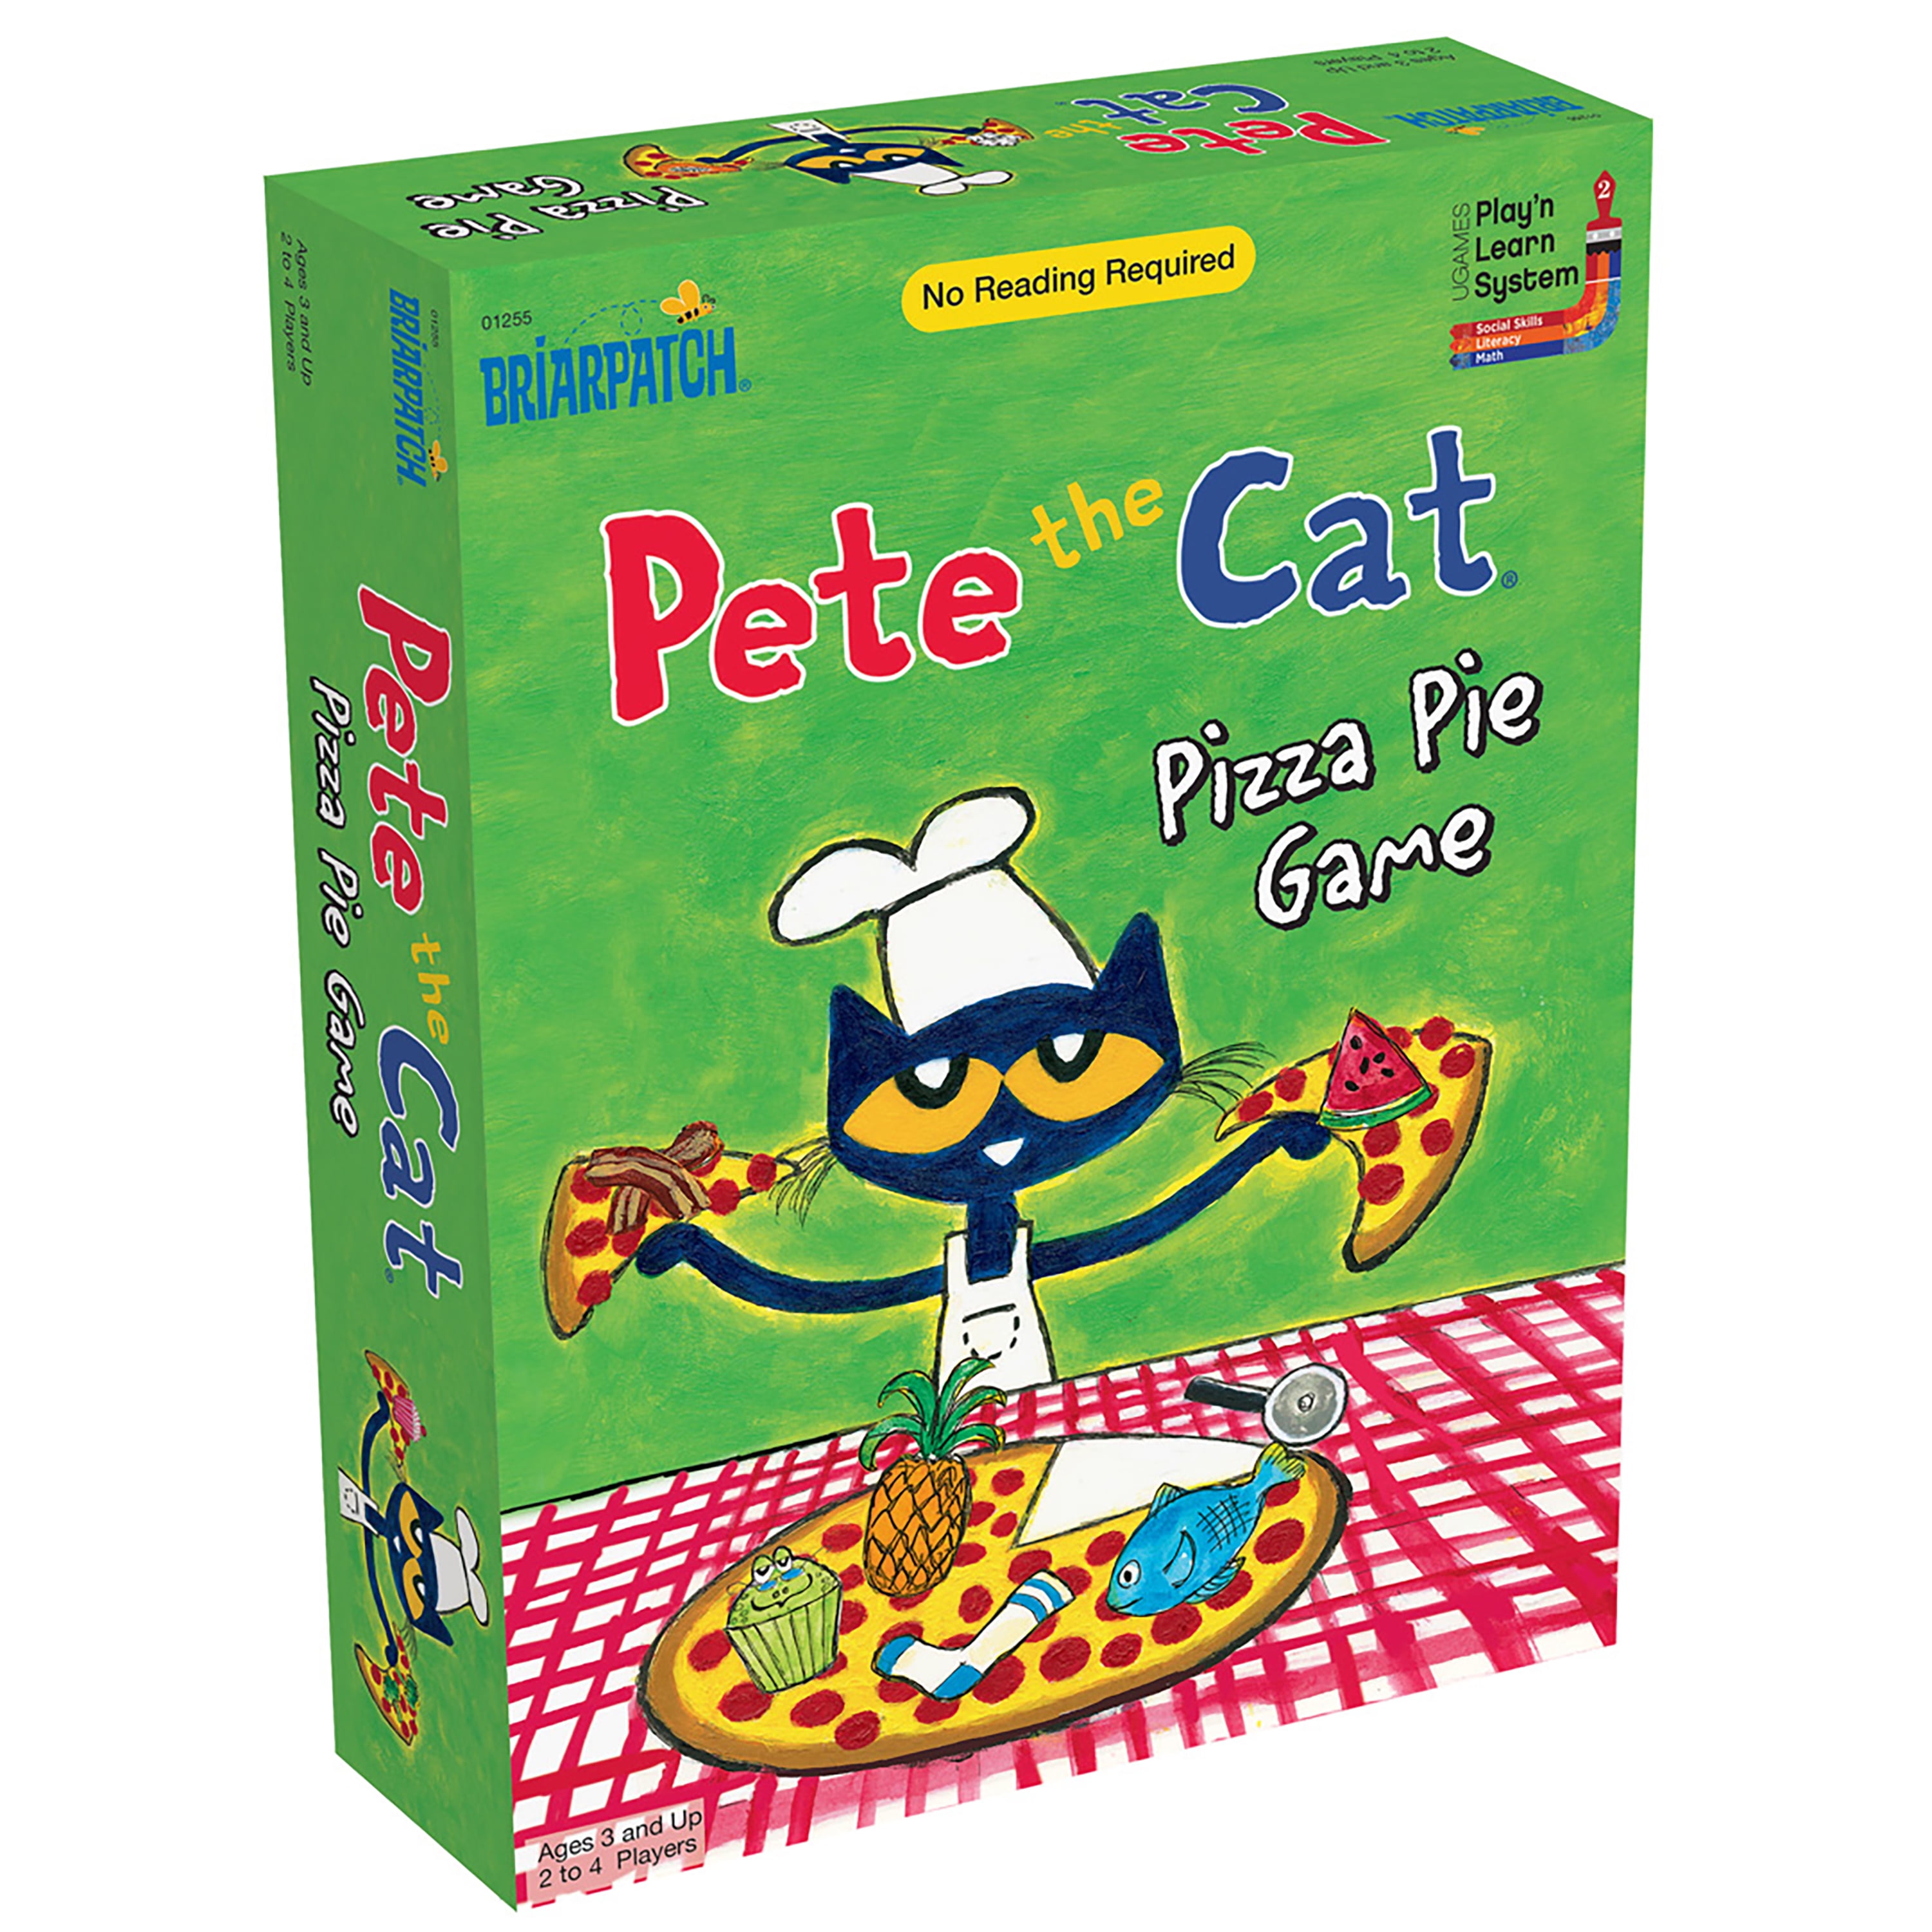 Briarpatch Pete the Cat Missing Cupcakes Board Game - Walmart.com